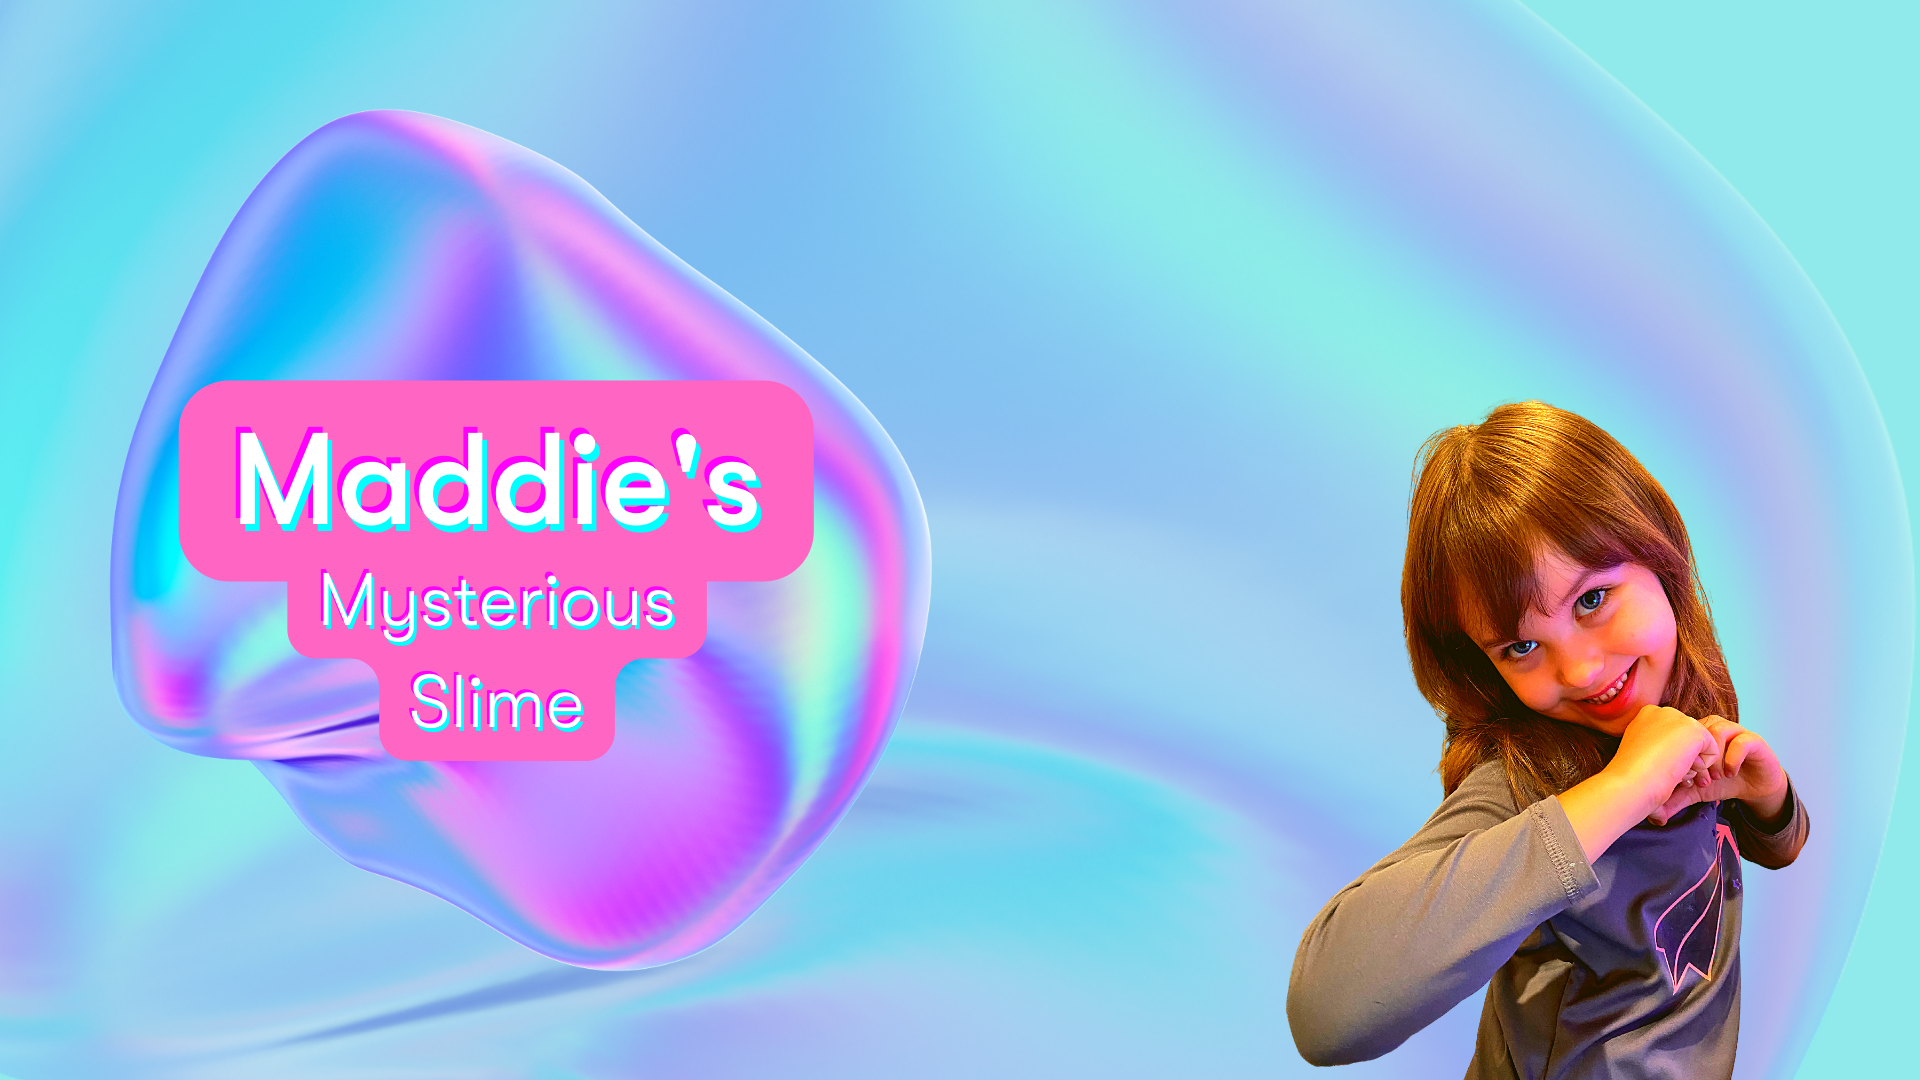 Maddie's Mysterious Slime